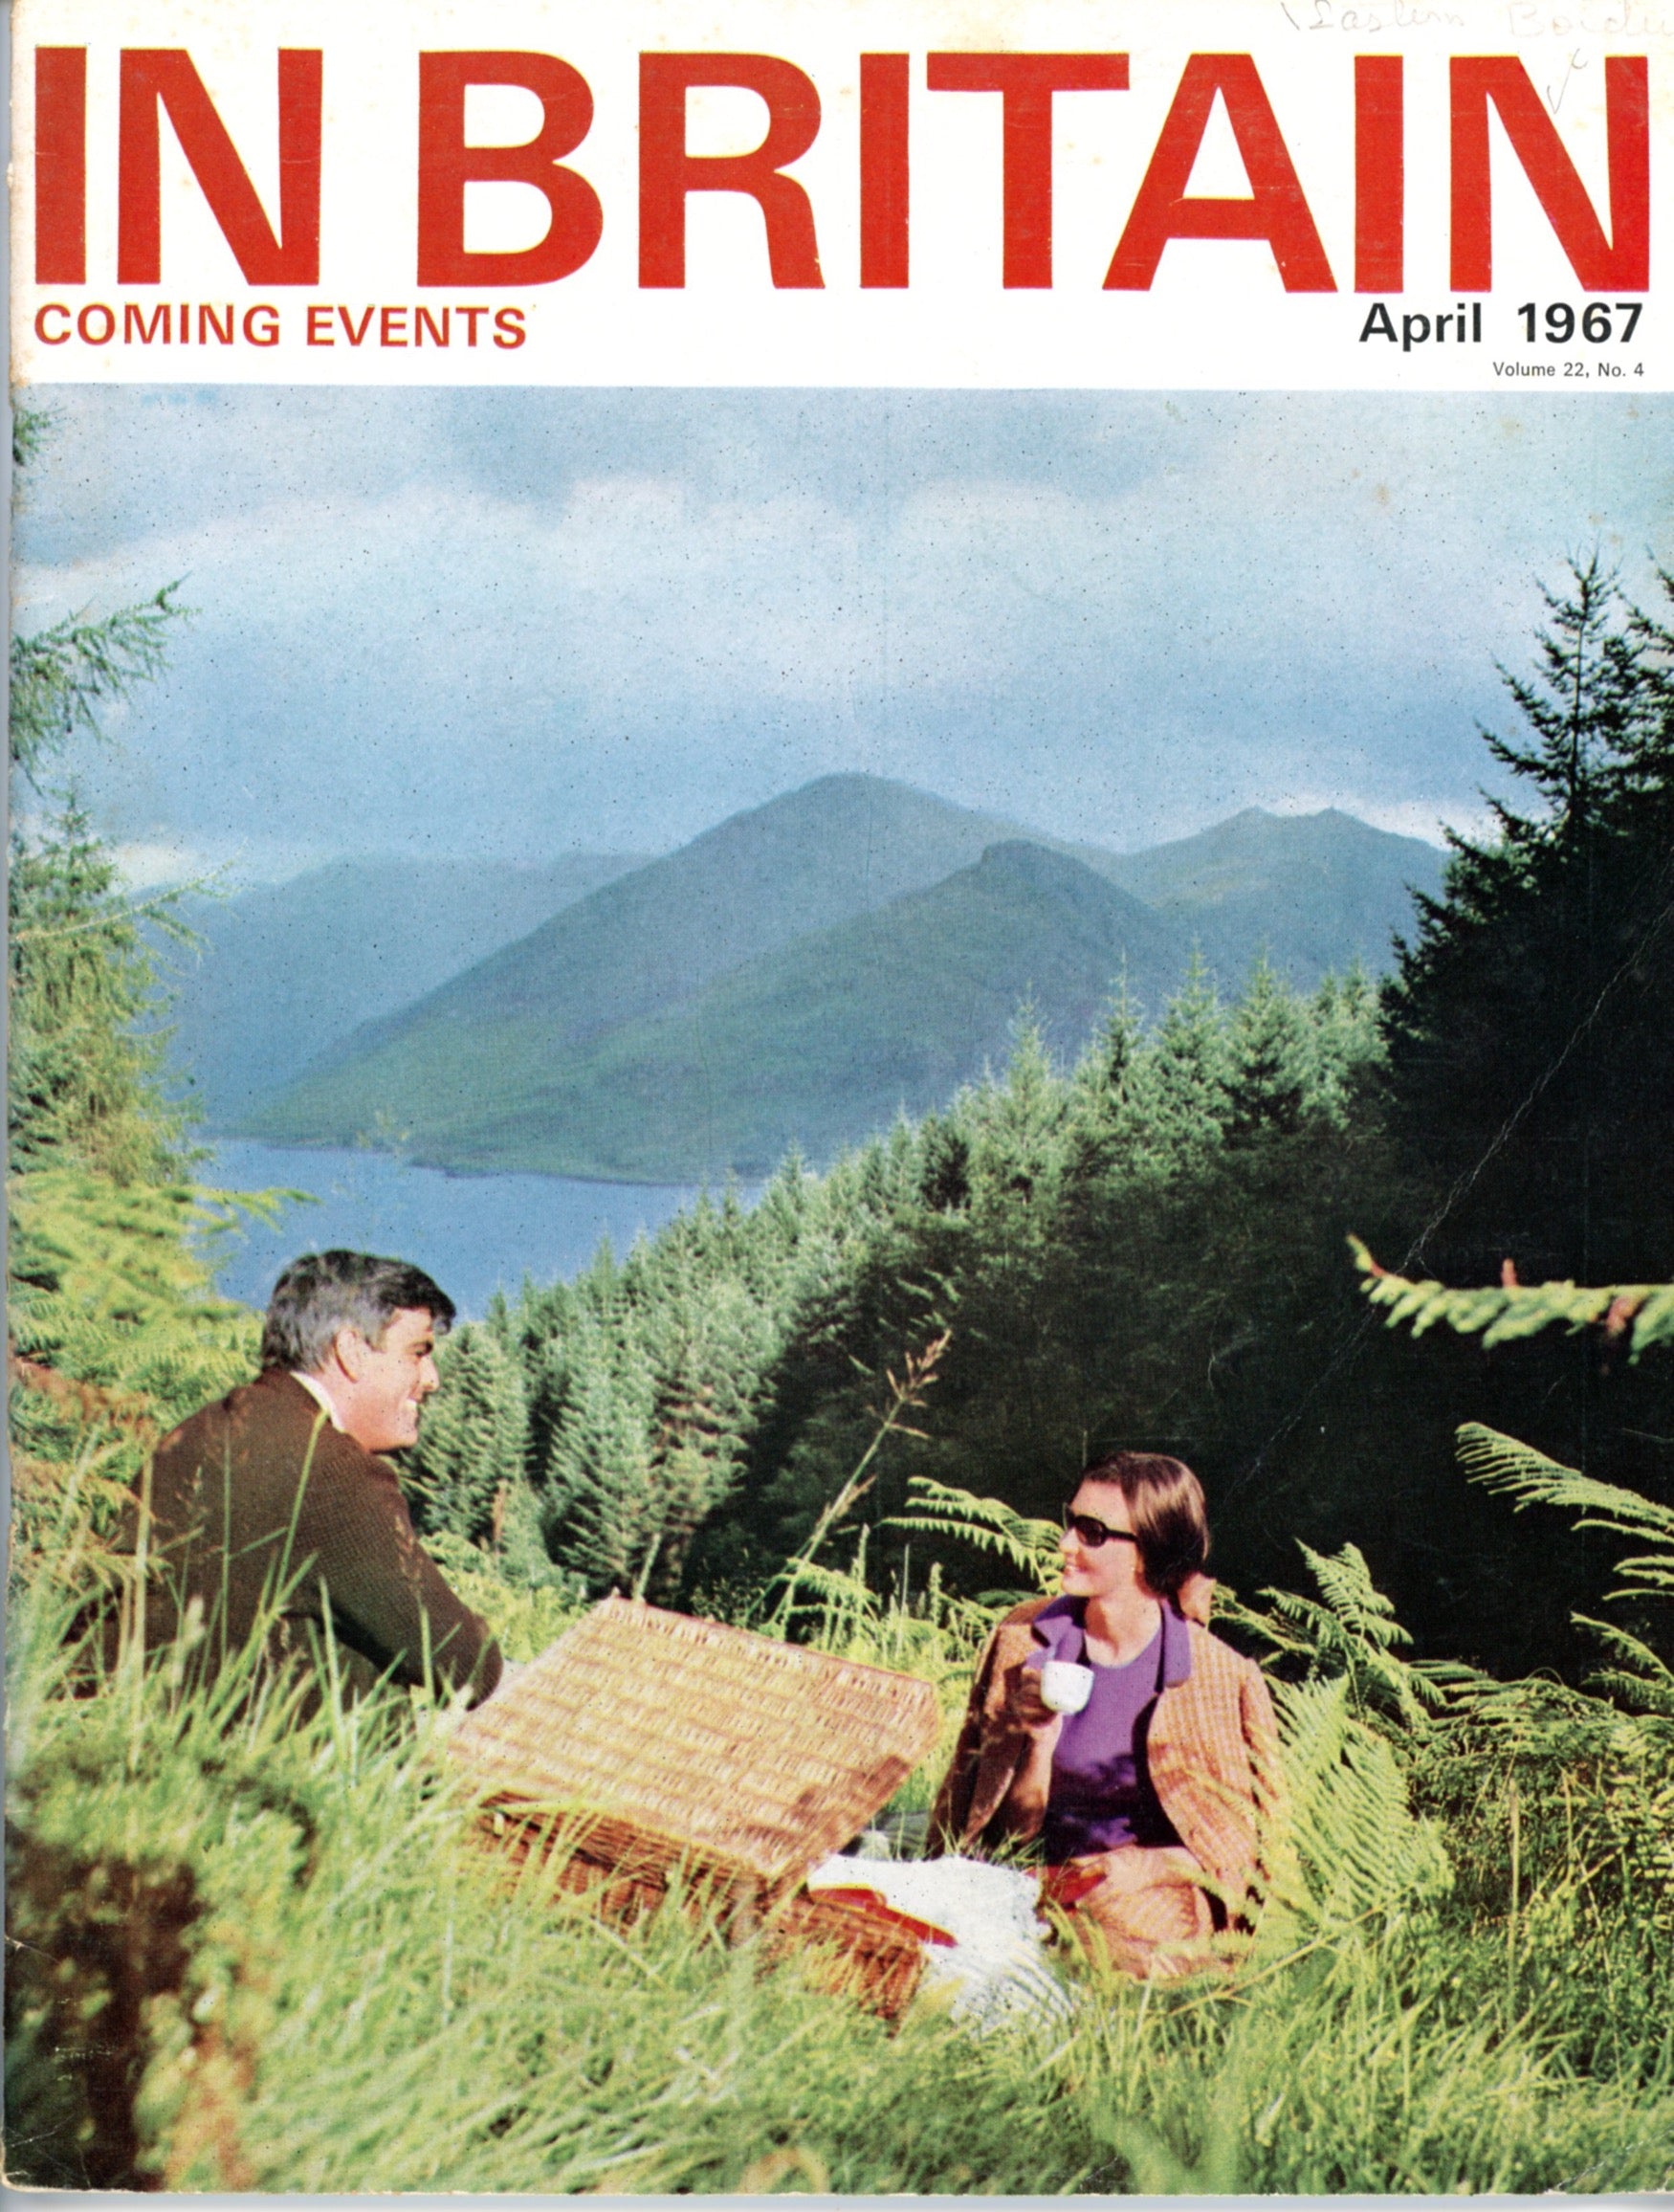 COMING EVENTS IN BRITAIN Vintage Travel Magazines Single Issues © April 1967